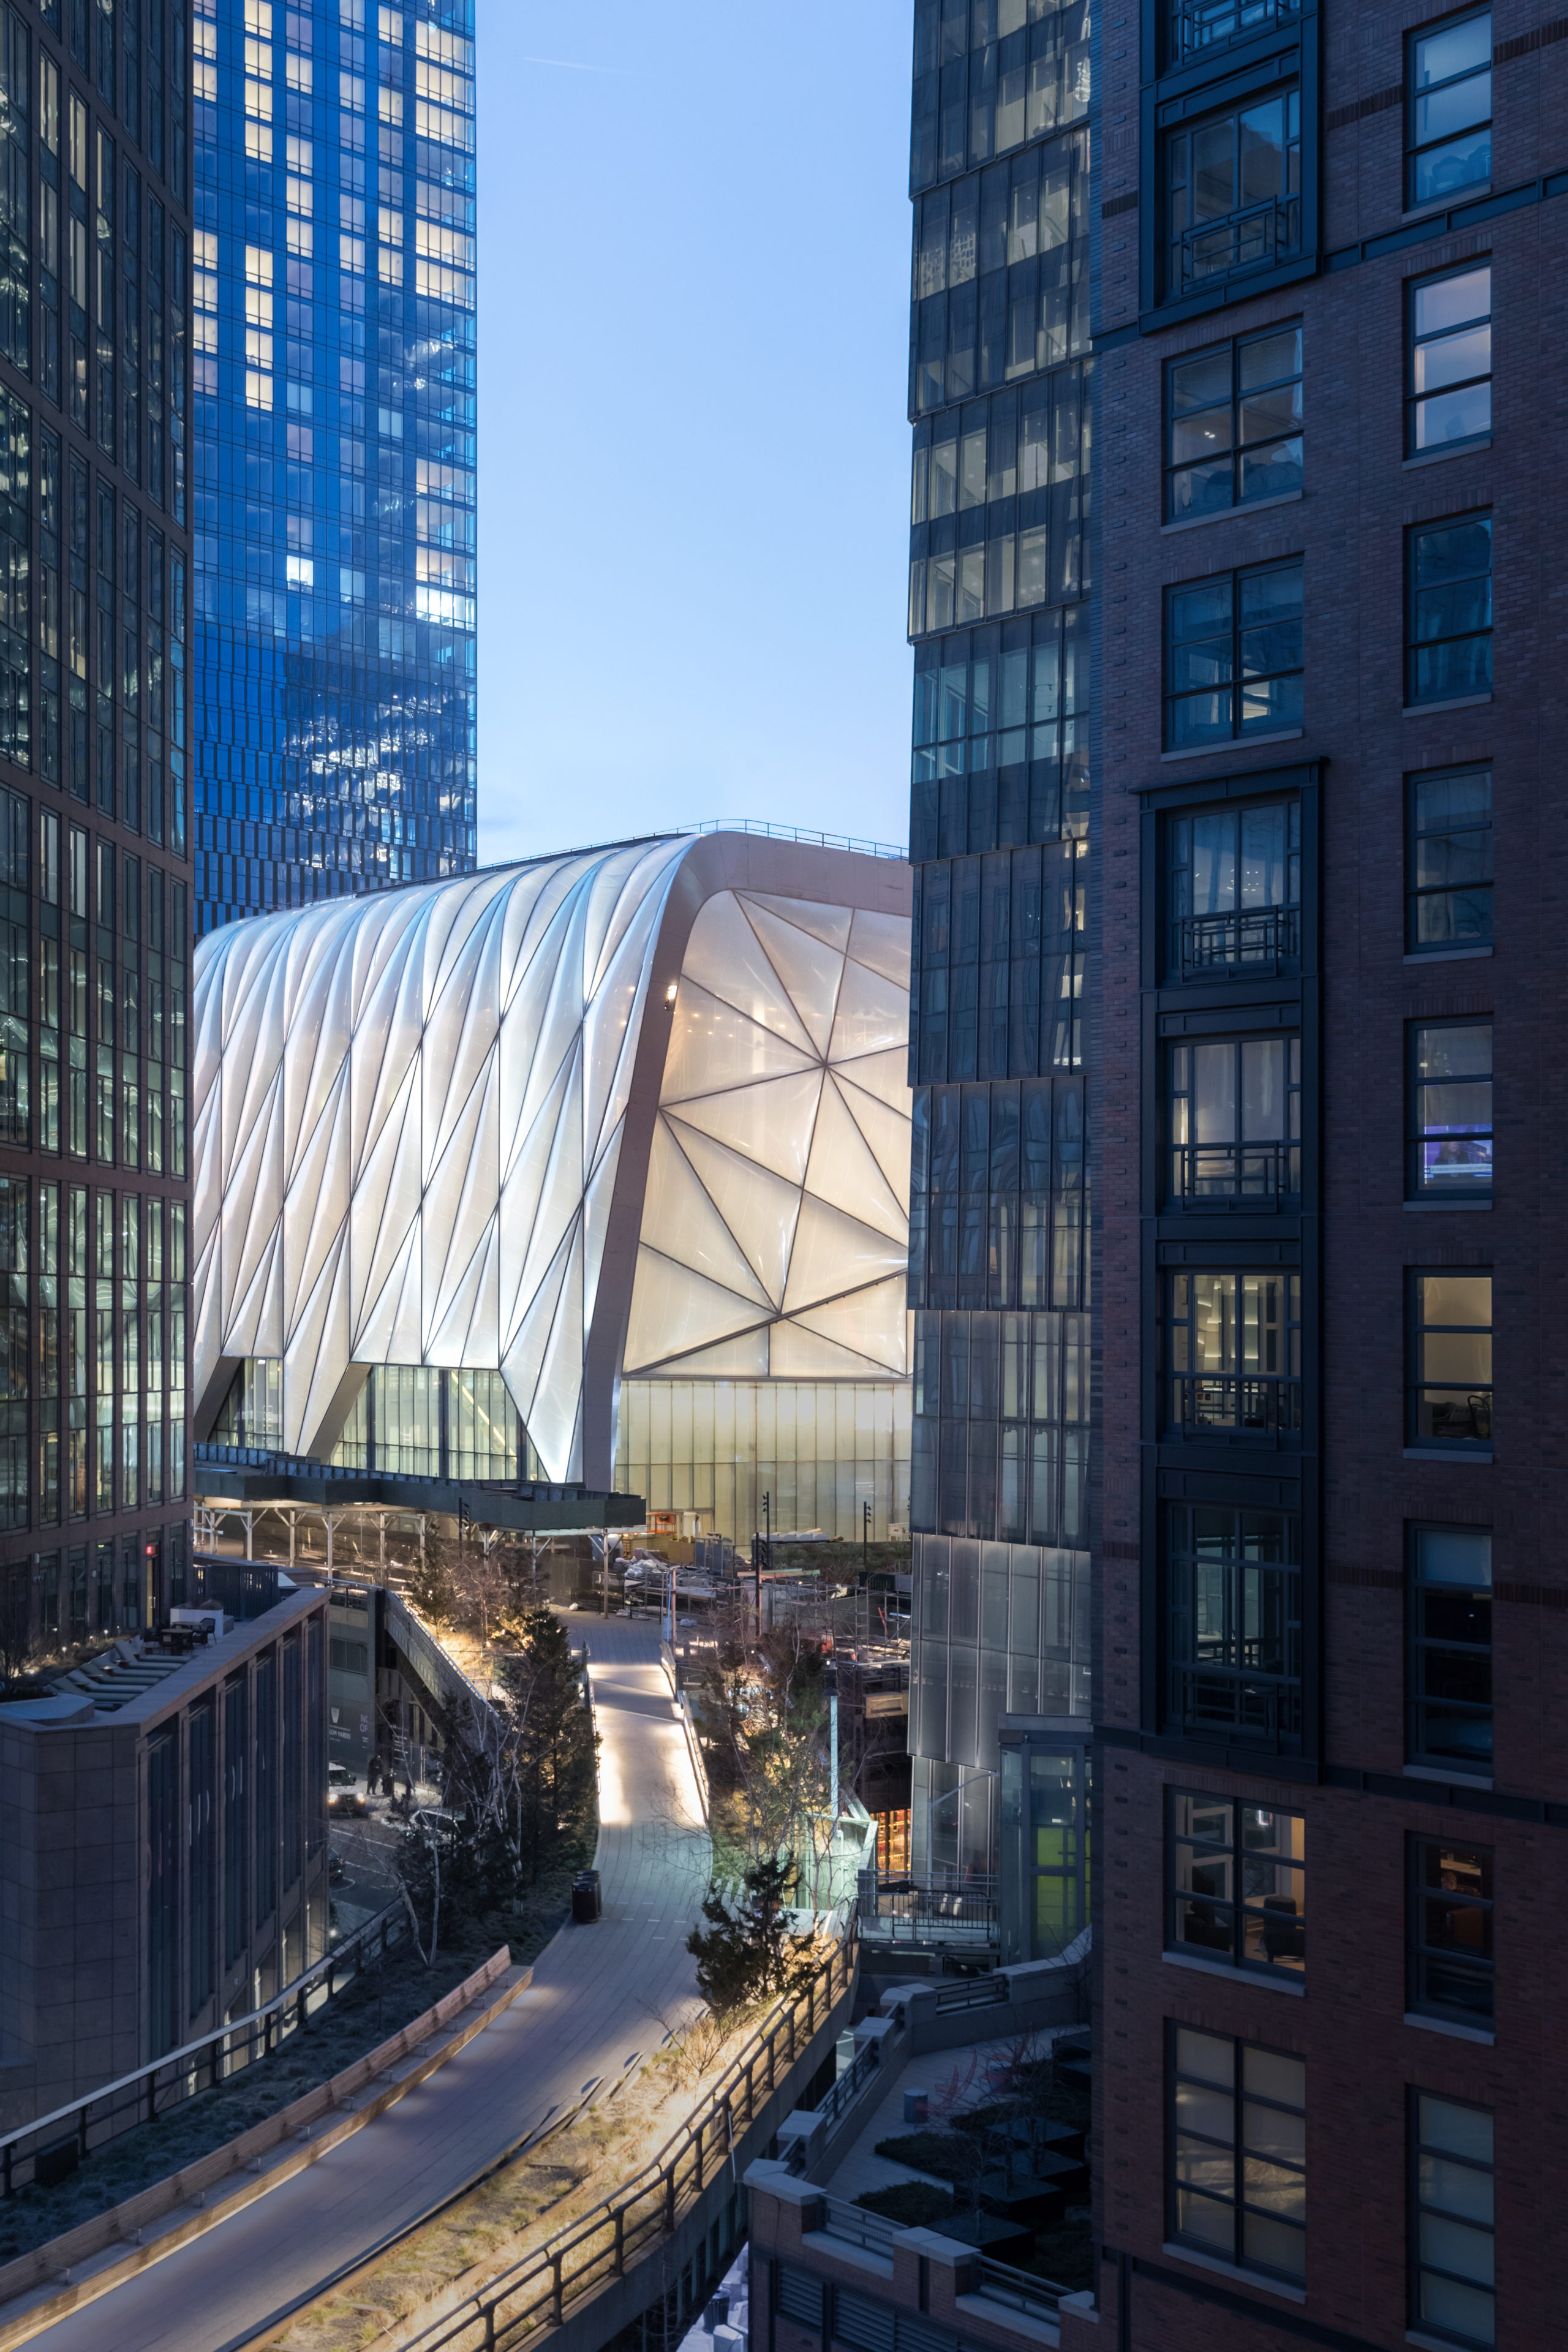 Architecture Honor Award: The Shed by Diller Scofidio + Renfro and Rockwell Group in New York, NY. Photo: Iwan Baan.